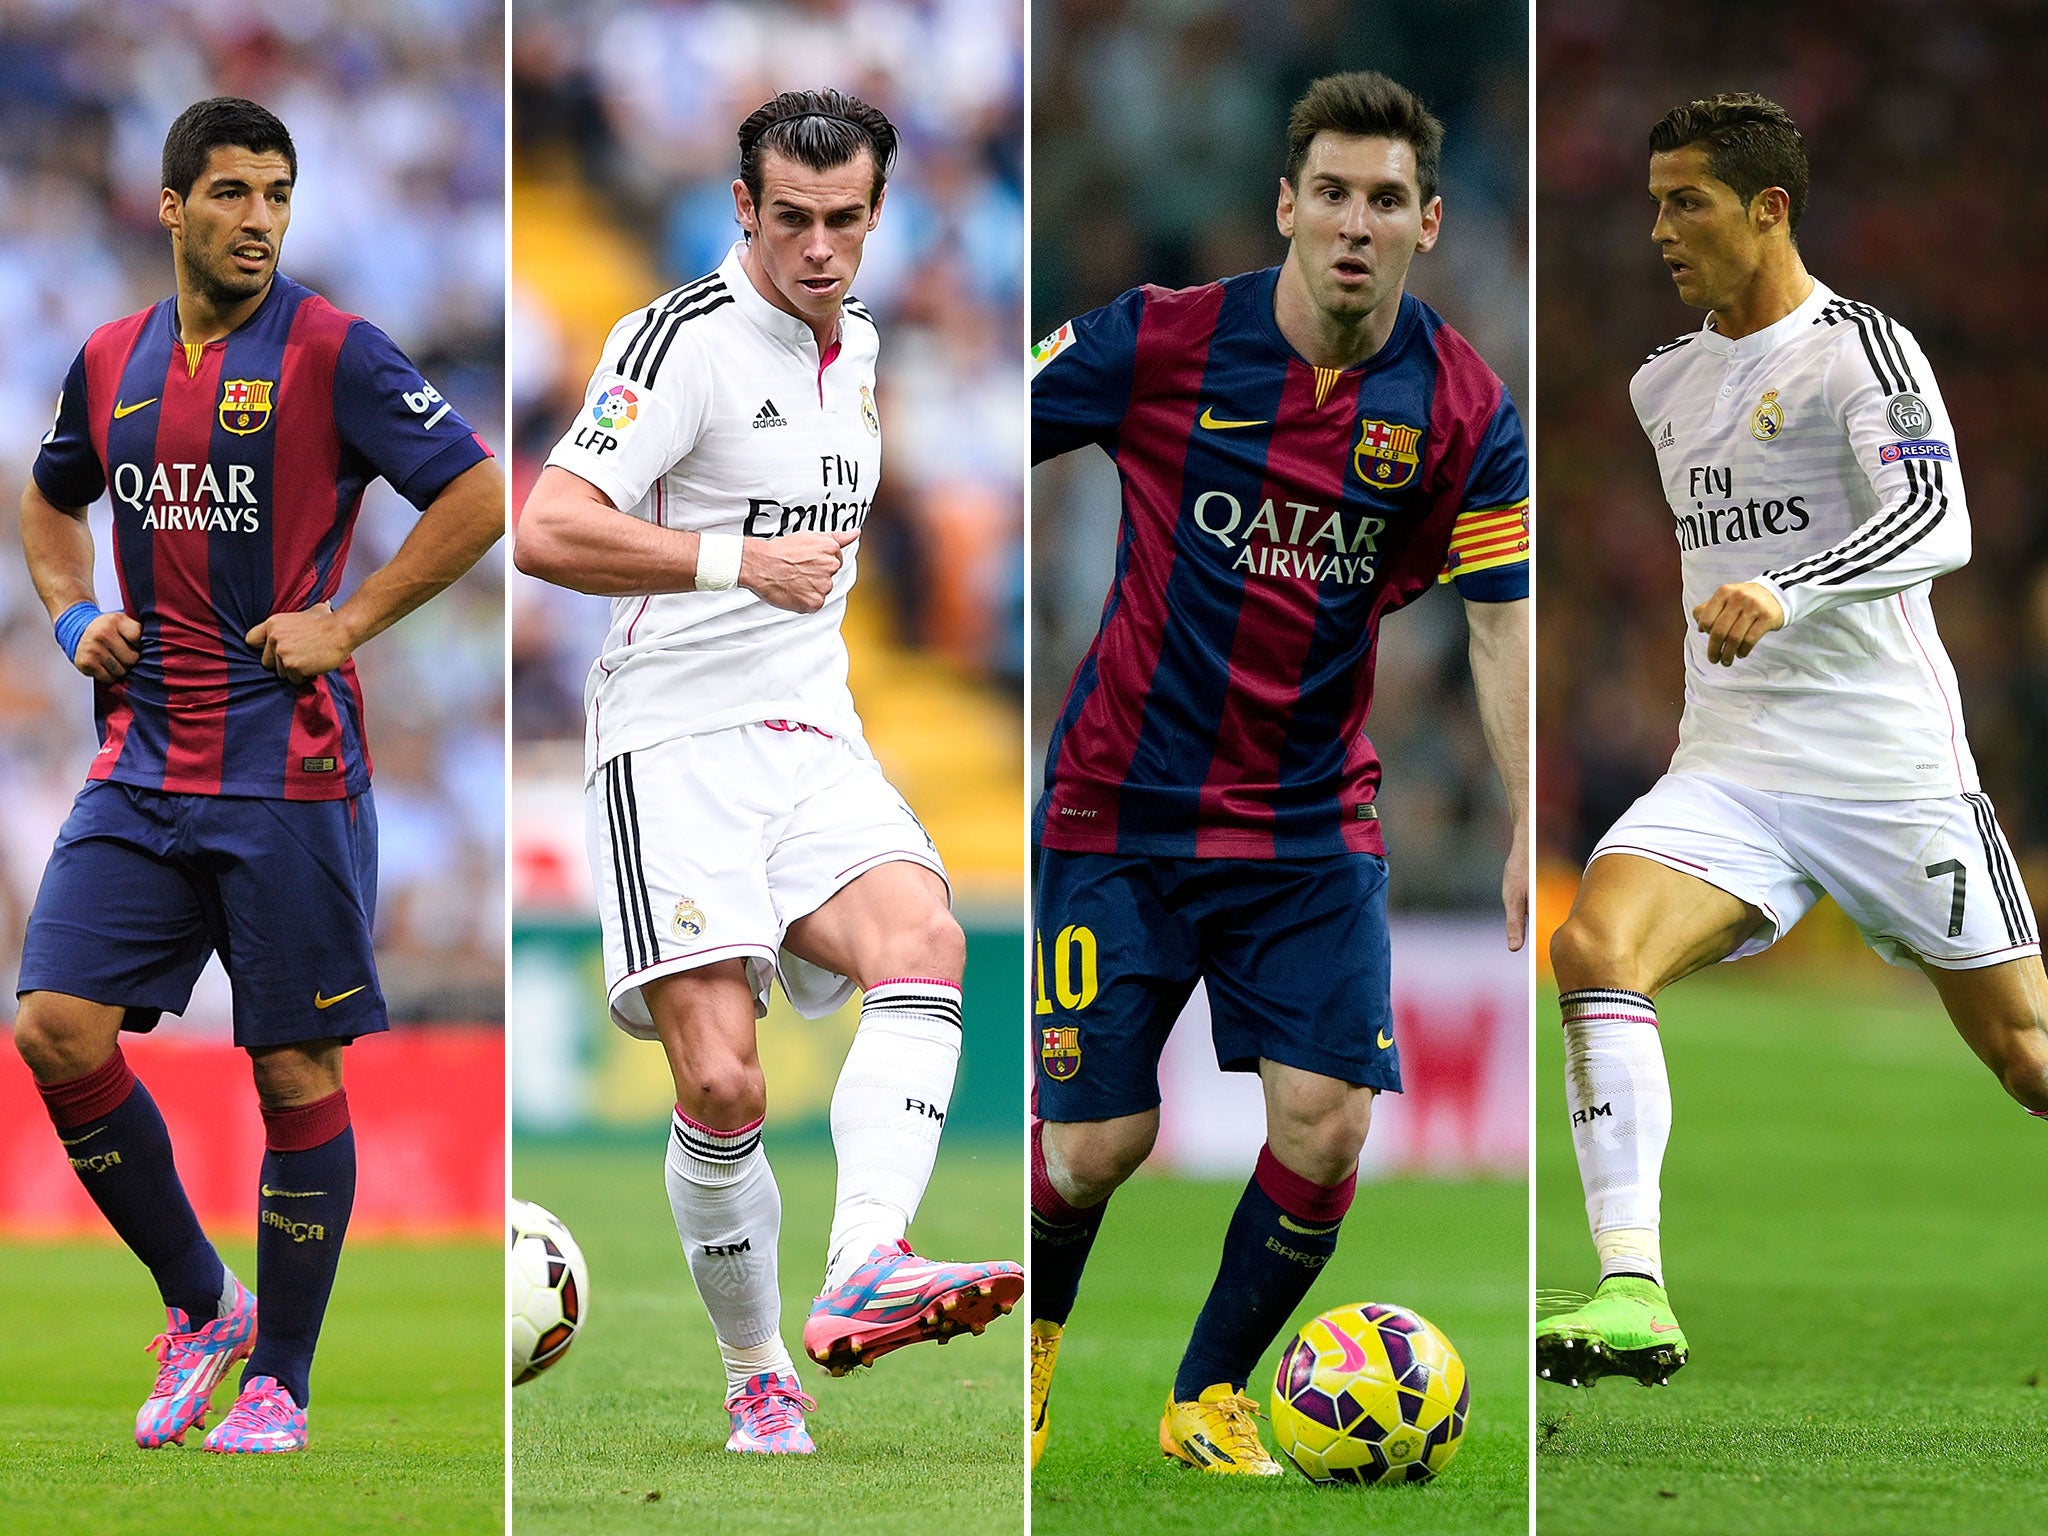 Ballon d'Or 2014: Luis Suarez omitted from 23-man shortlist as Cristiano  Ronaldo, Lionel Messi and Gareth Bale all included, The Independent